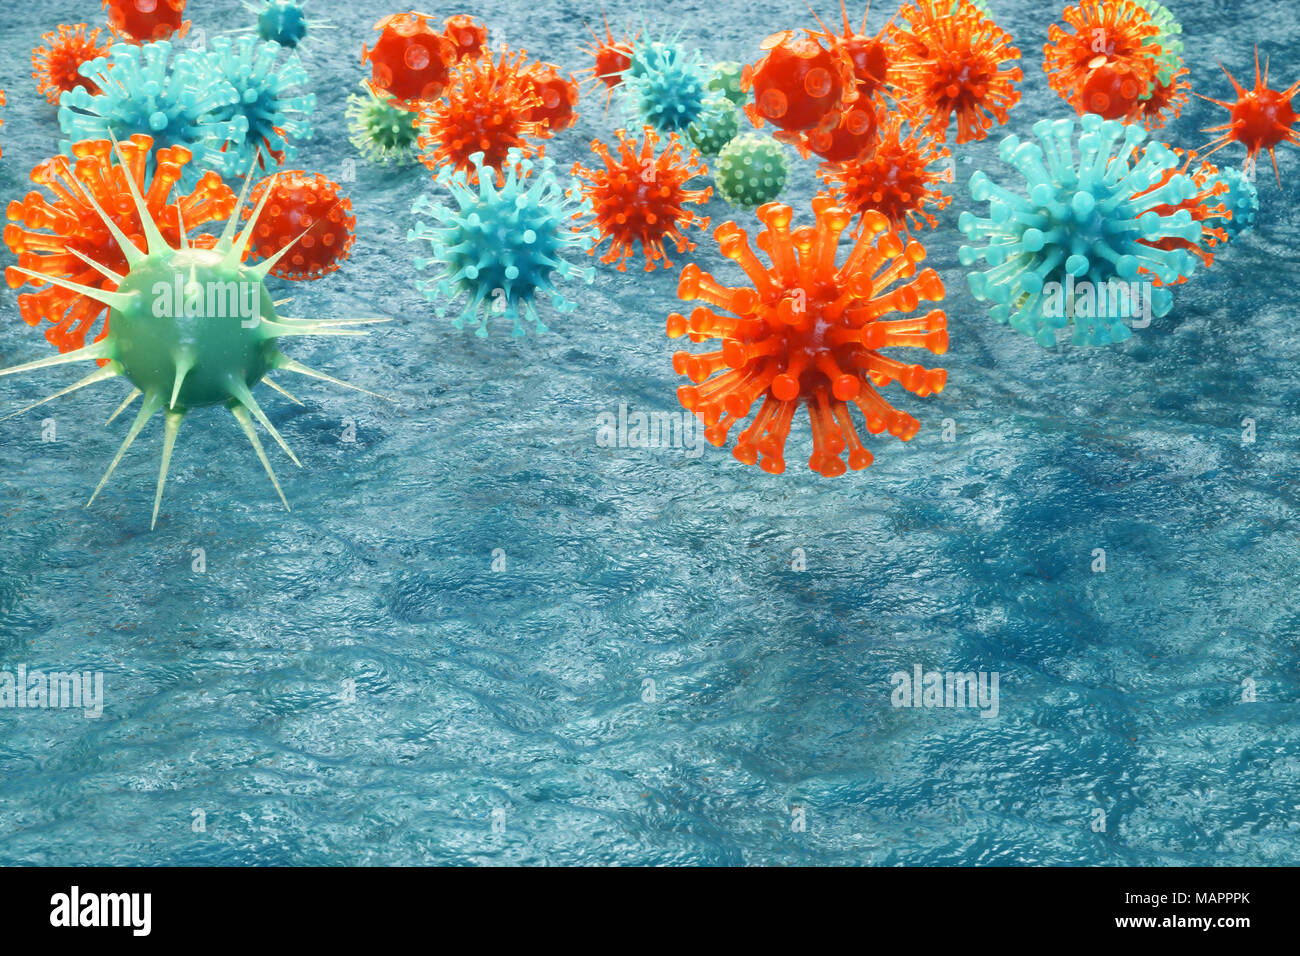 3D illustration pathogenic viruses causing infection in host organism. Viral disease epidemic. Virus abstract background. Virus, bacteria, cell infected organism. Stock Photo